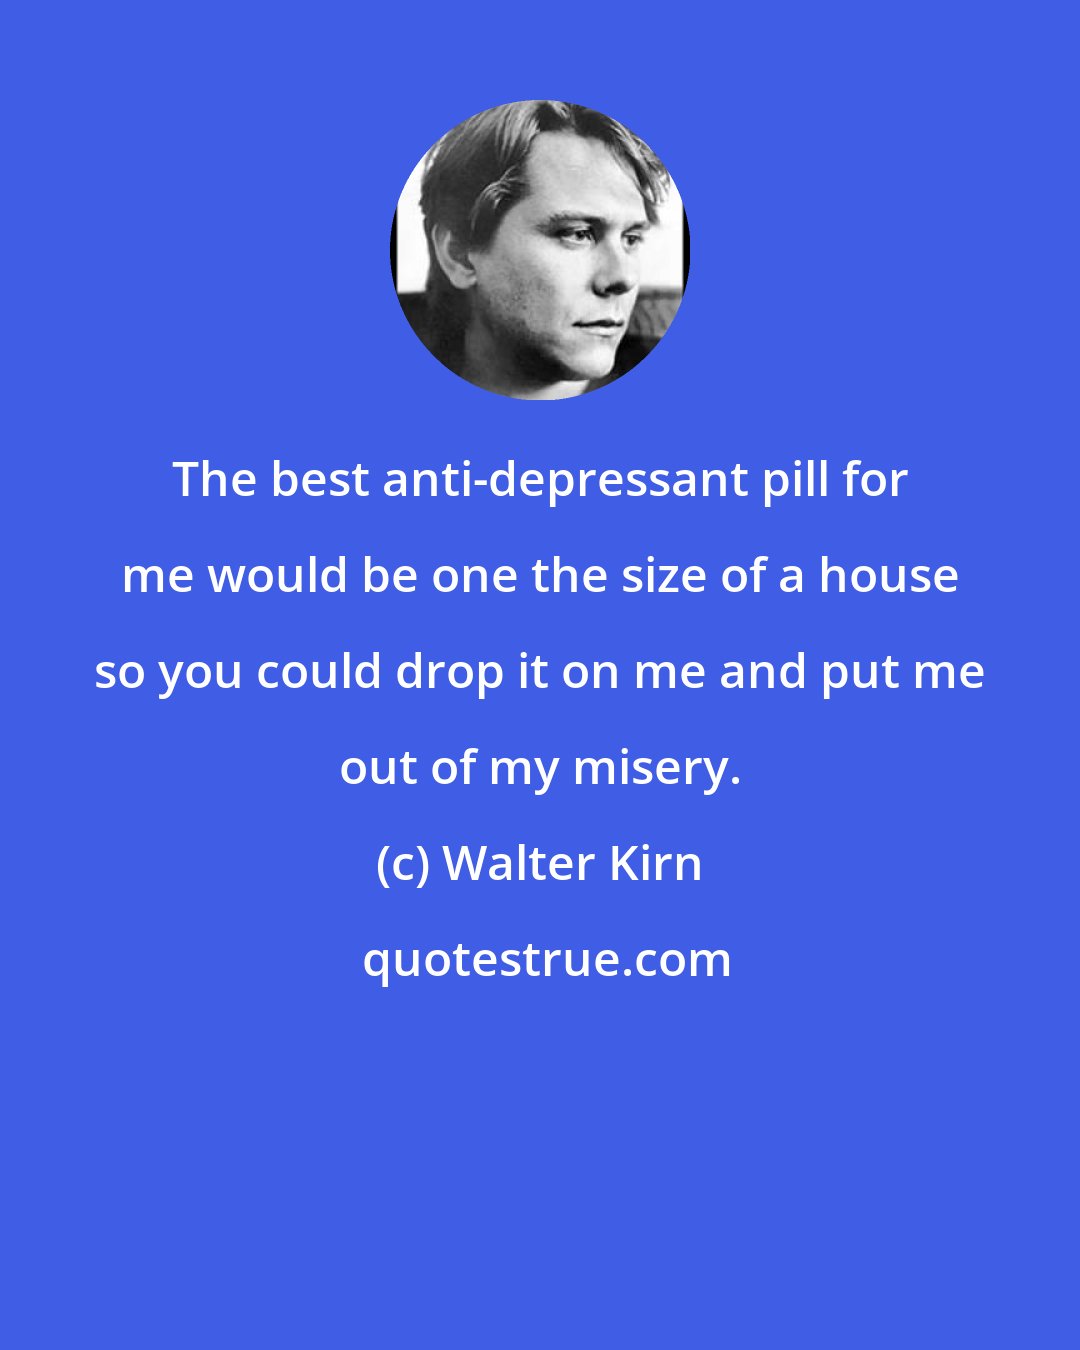 Walter Kirn: The best anti-depressant pill for me would be one the size of a house so you could drop it on me and put me out of my misery.